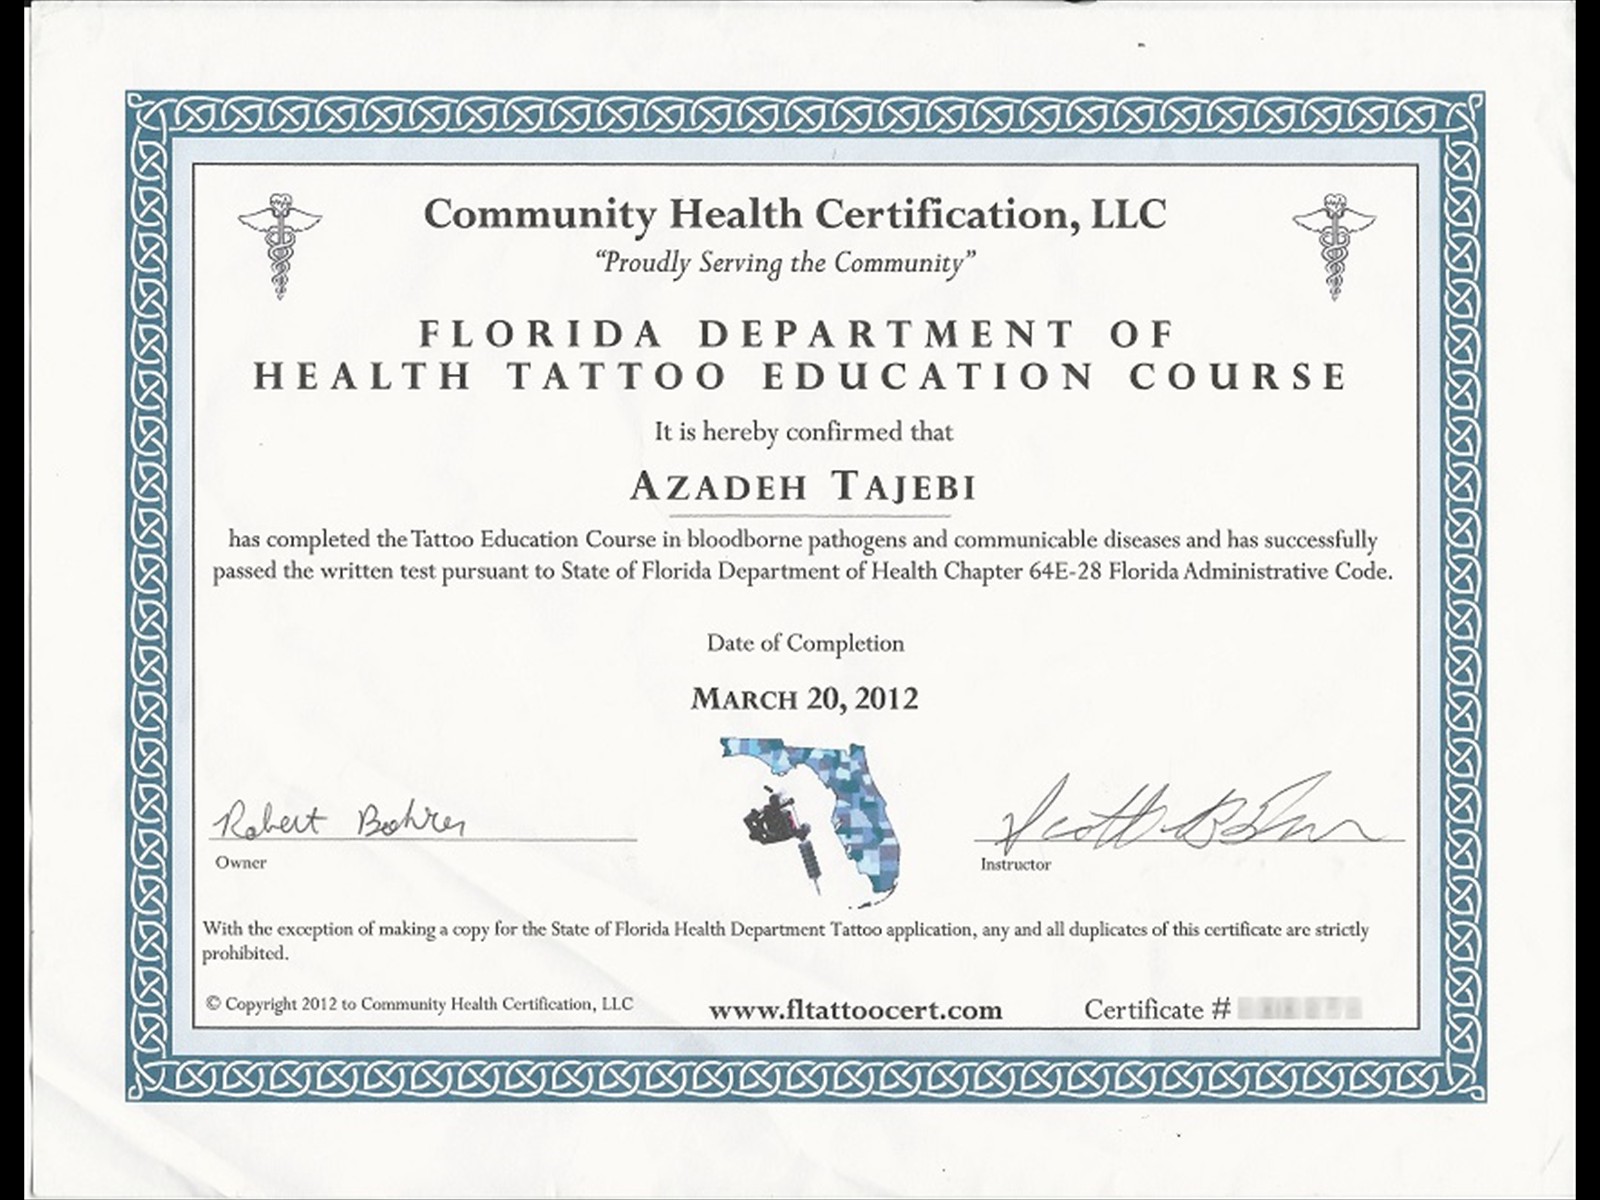 Florida Department of Health Tattoo Education Course